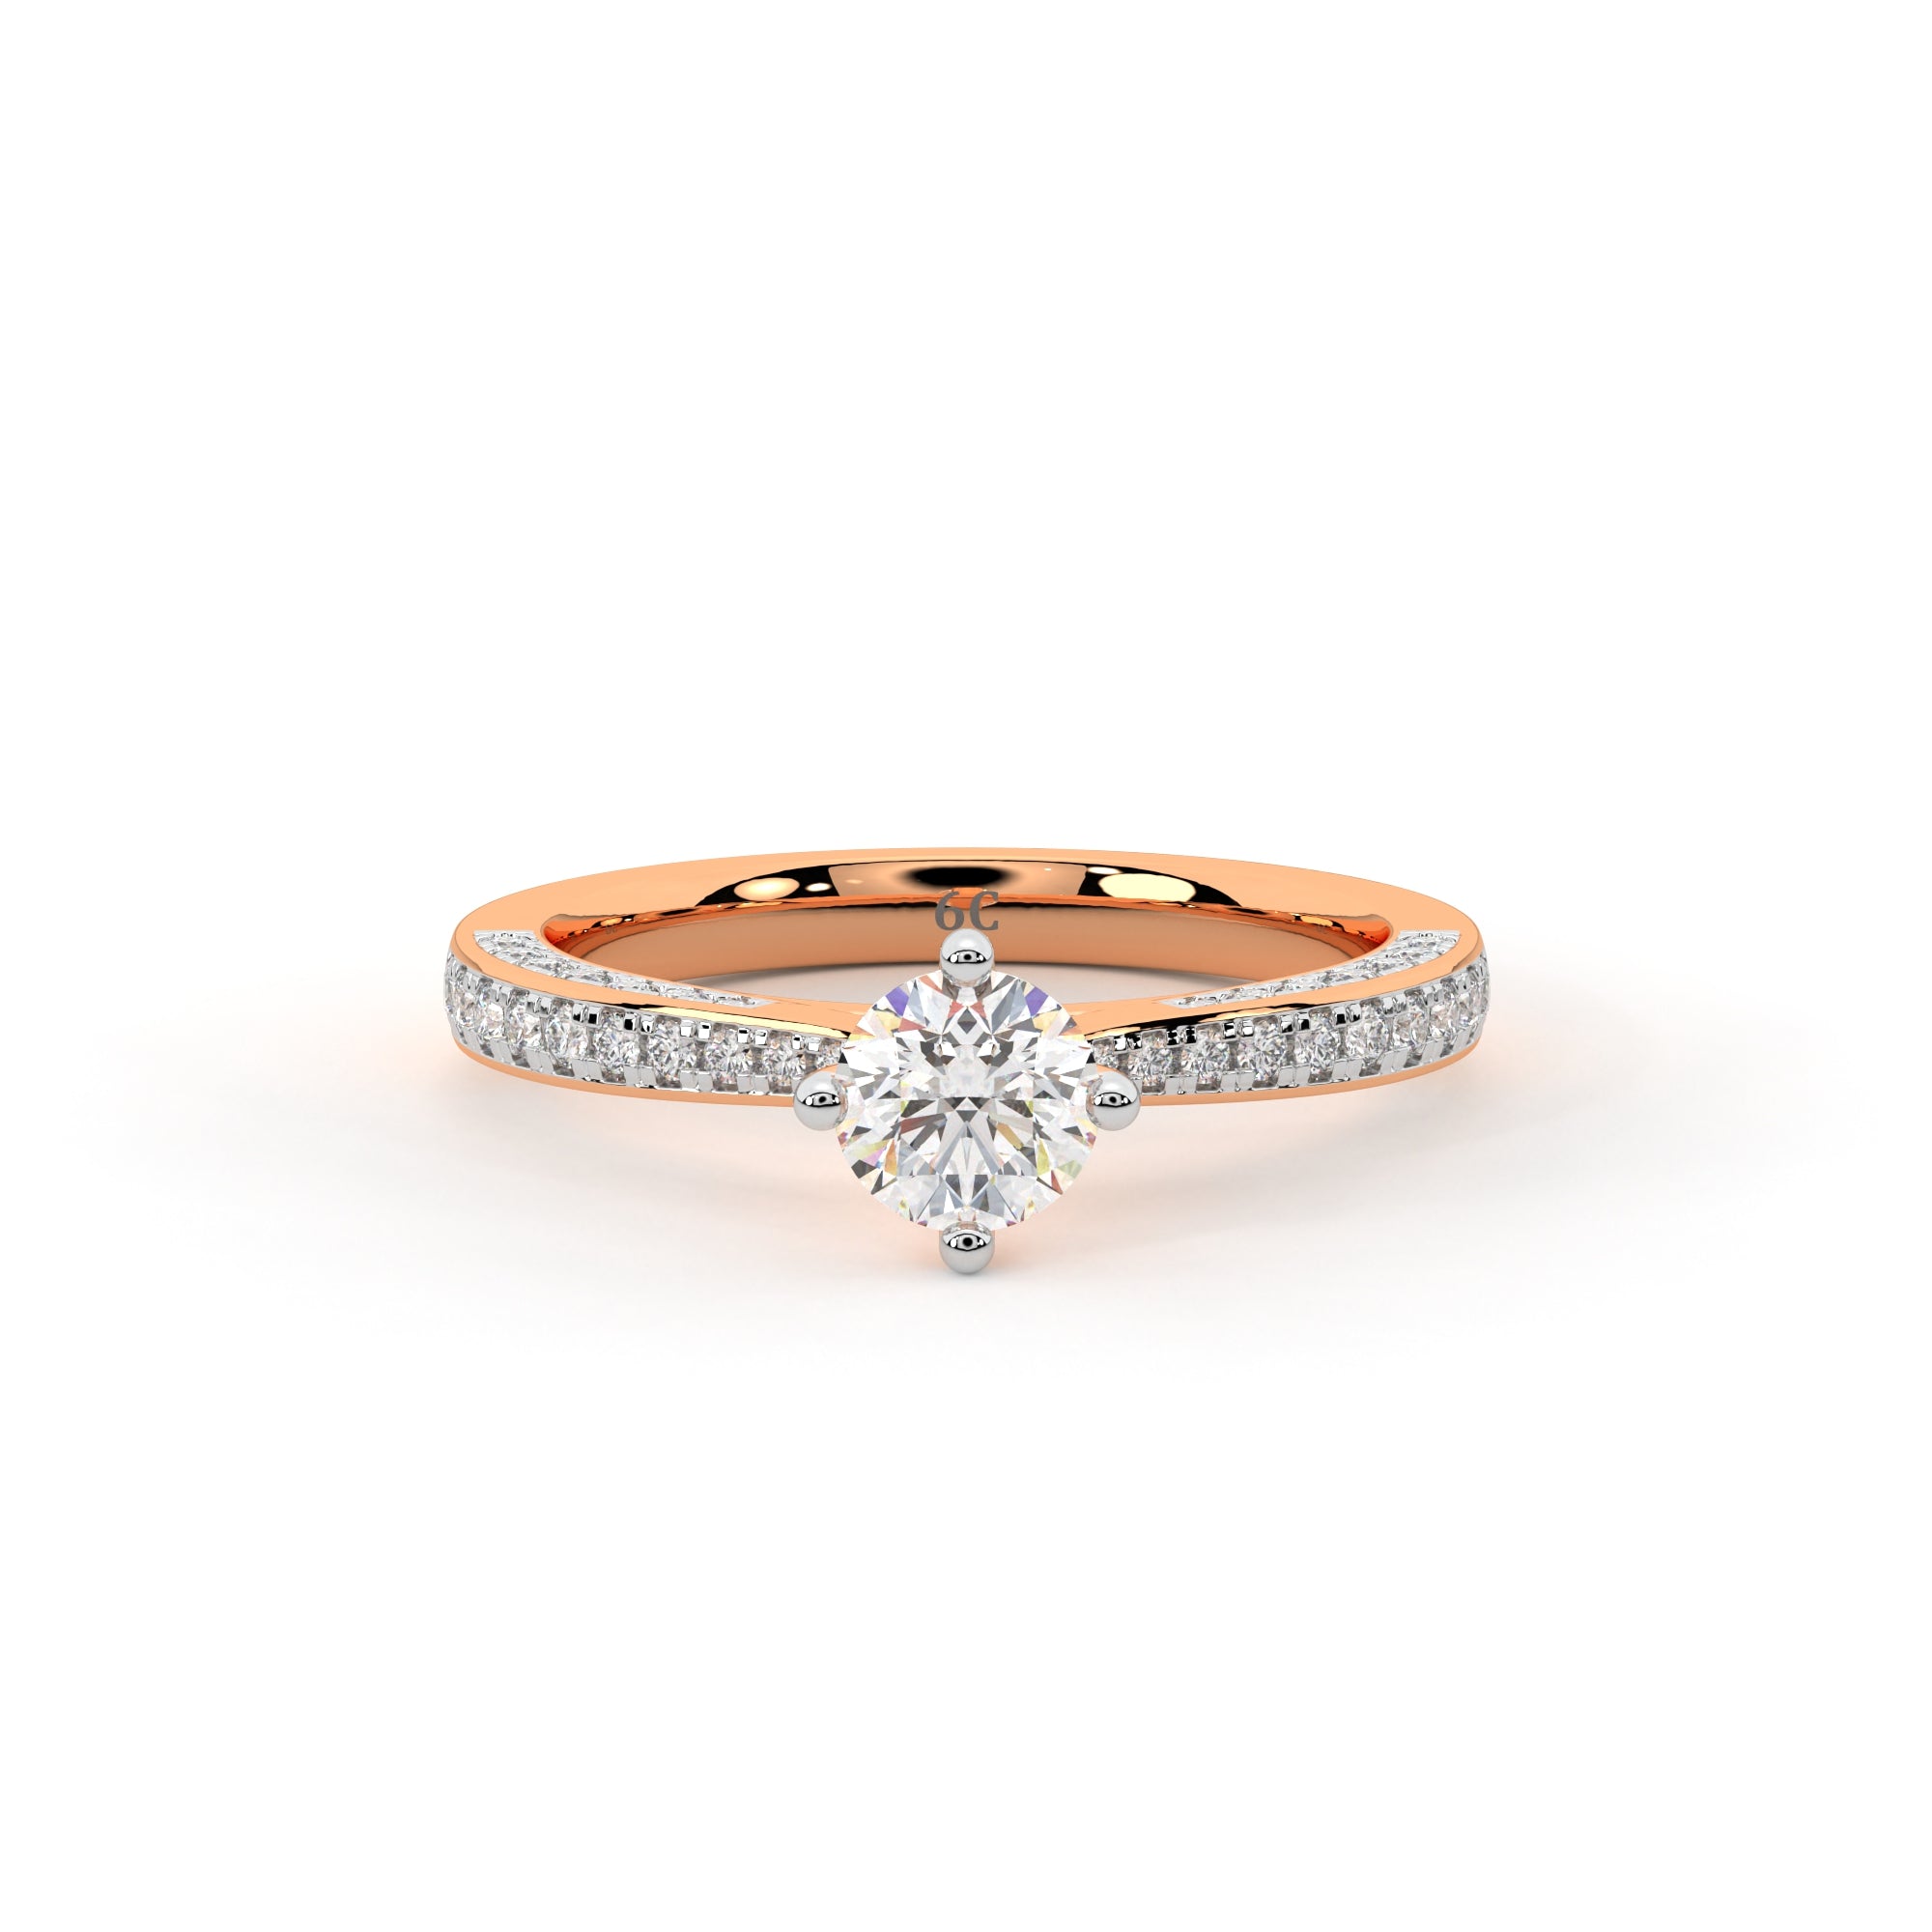 Dazzling Surroundings Solitaire Ring (Rose Gold)